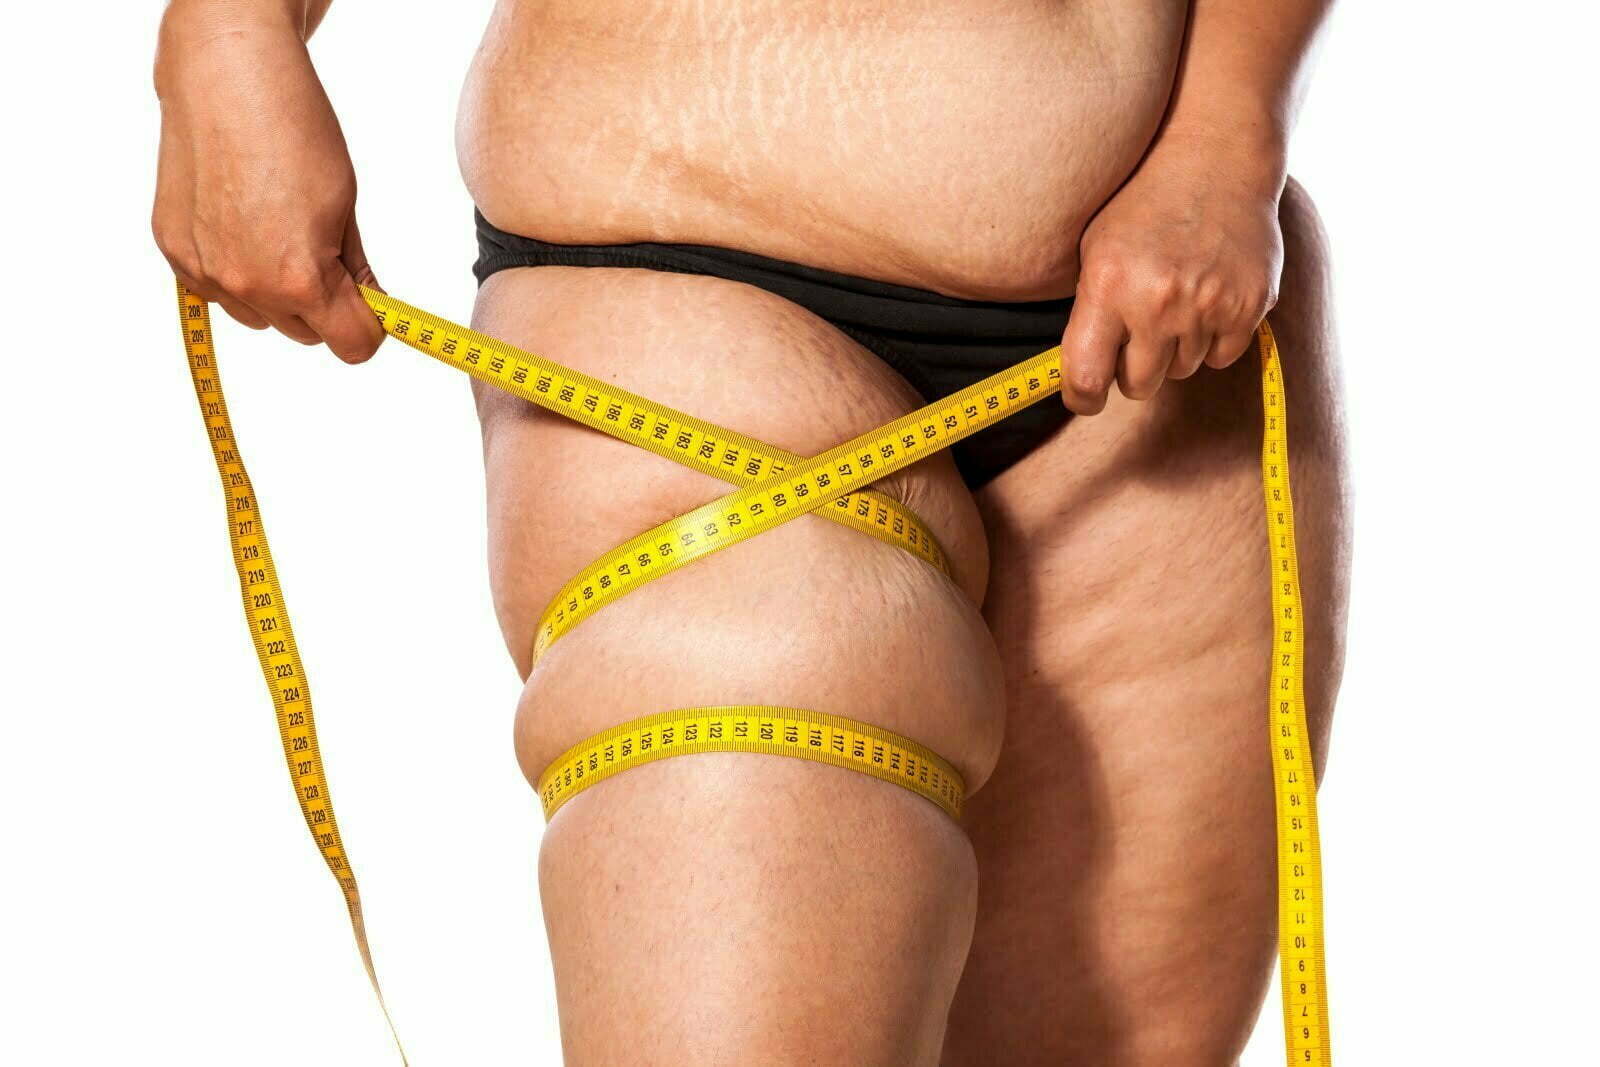 New Research Finds That With Obesity, the Problem Isn't an Excess of Fat  but Its Loss of Function